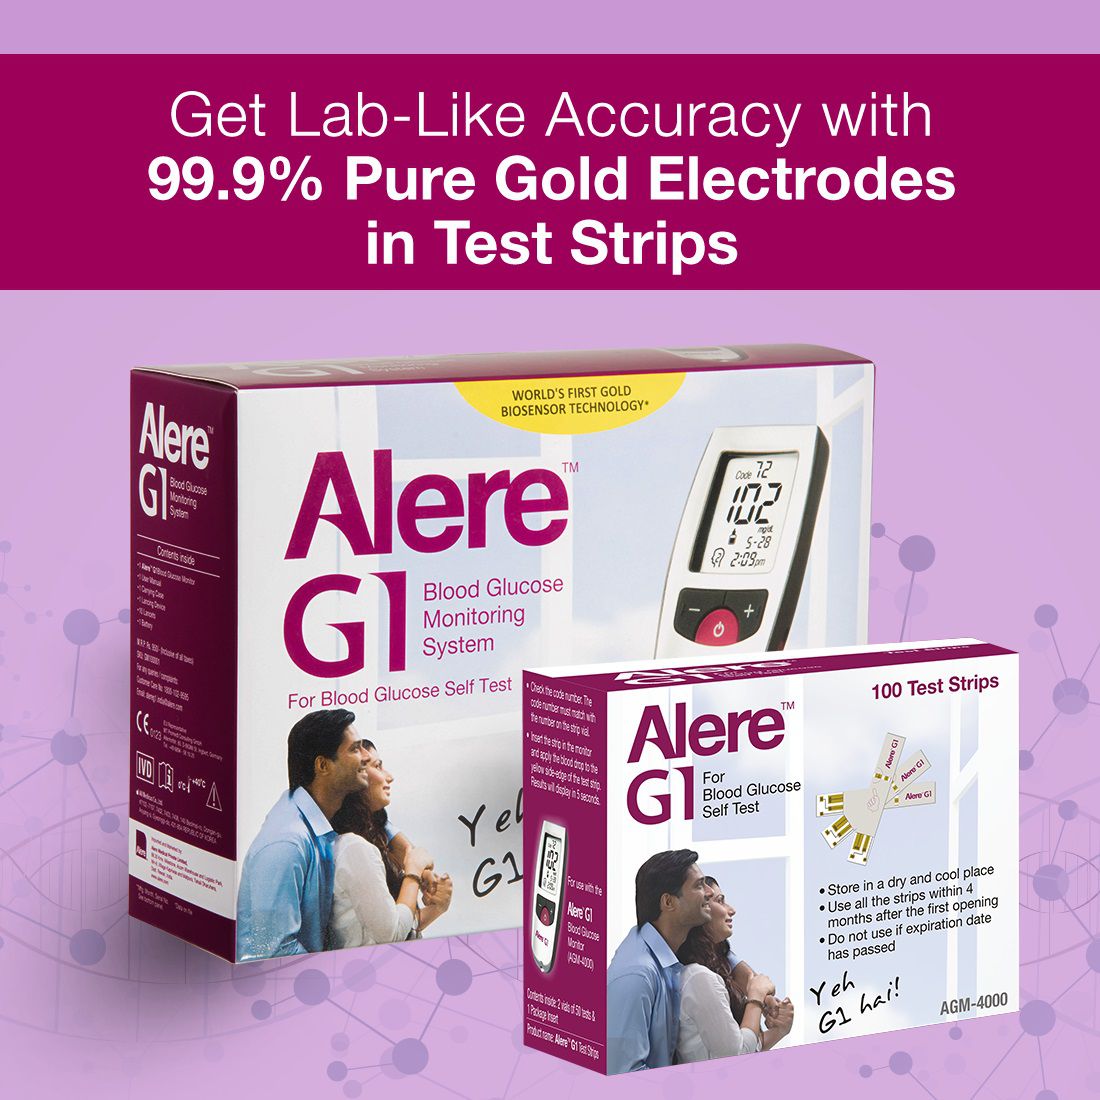     			Alere G1 Blood Glucose Monitor with 100 strips Pack